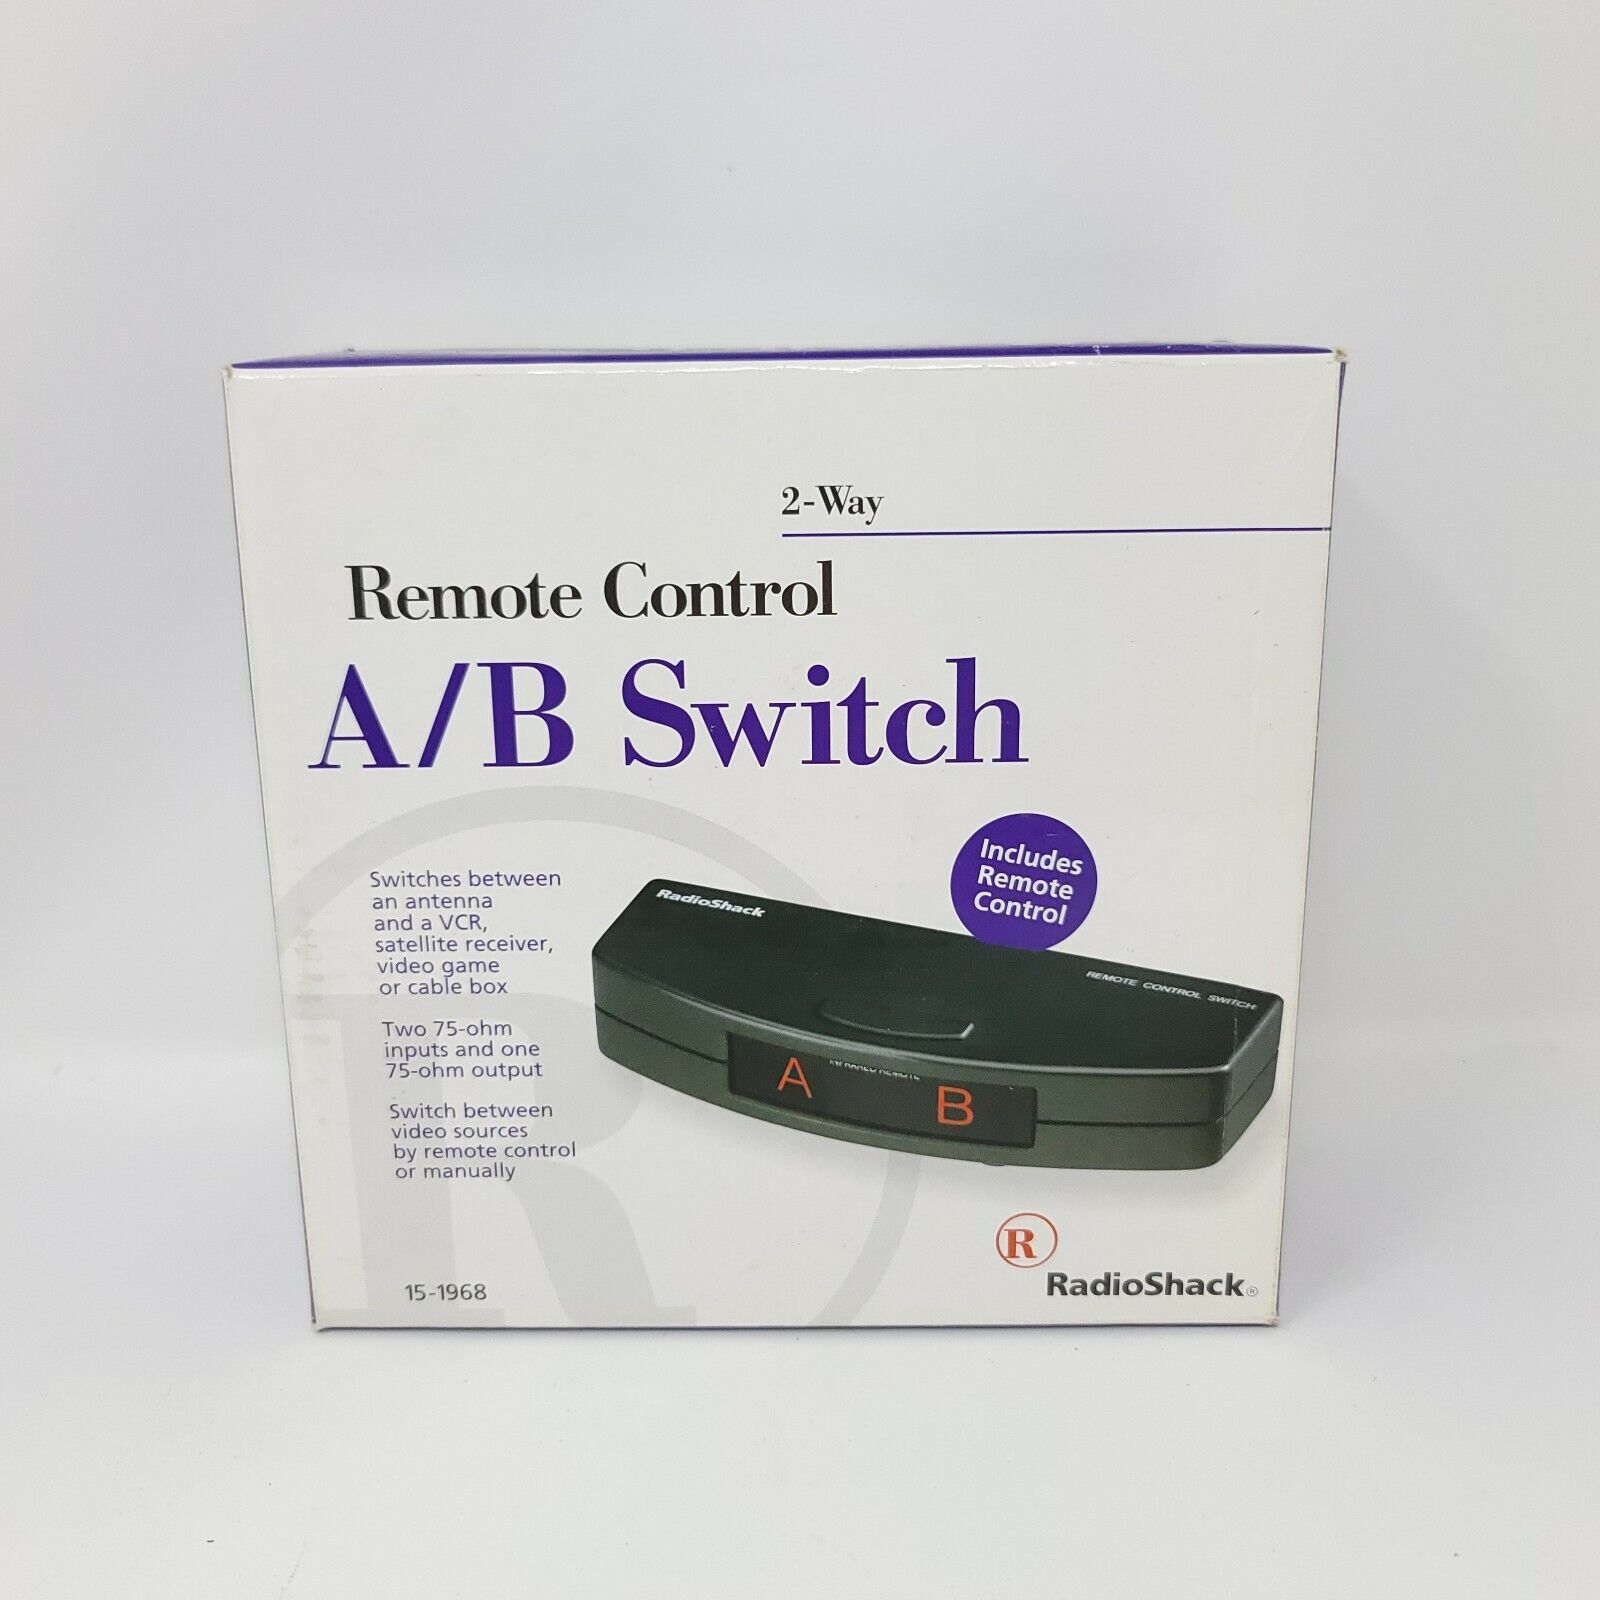 Radio Shack Rapid rise Remote Control A New product!! B Video Way Source 2 Switche Switch